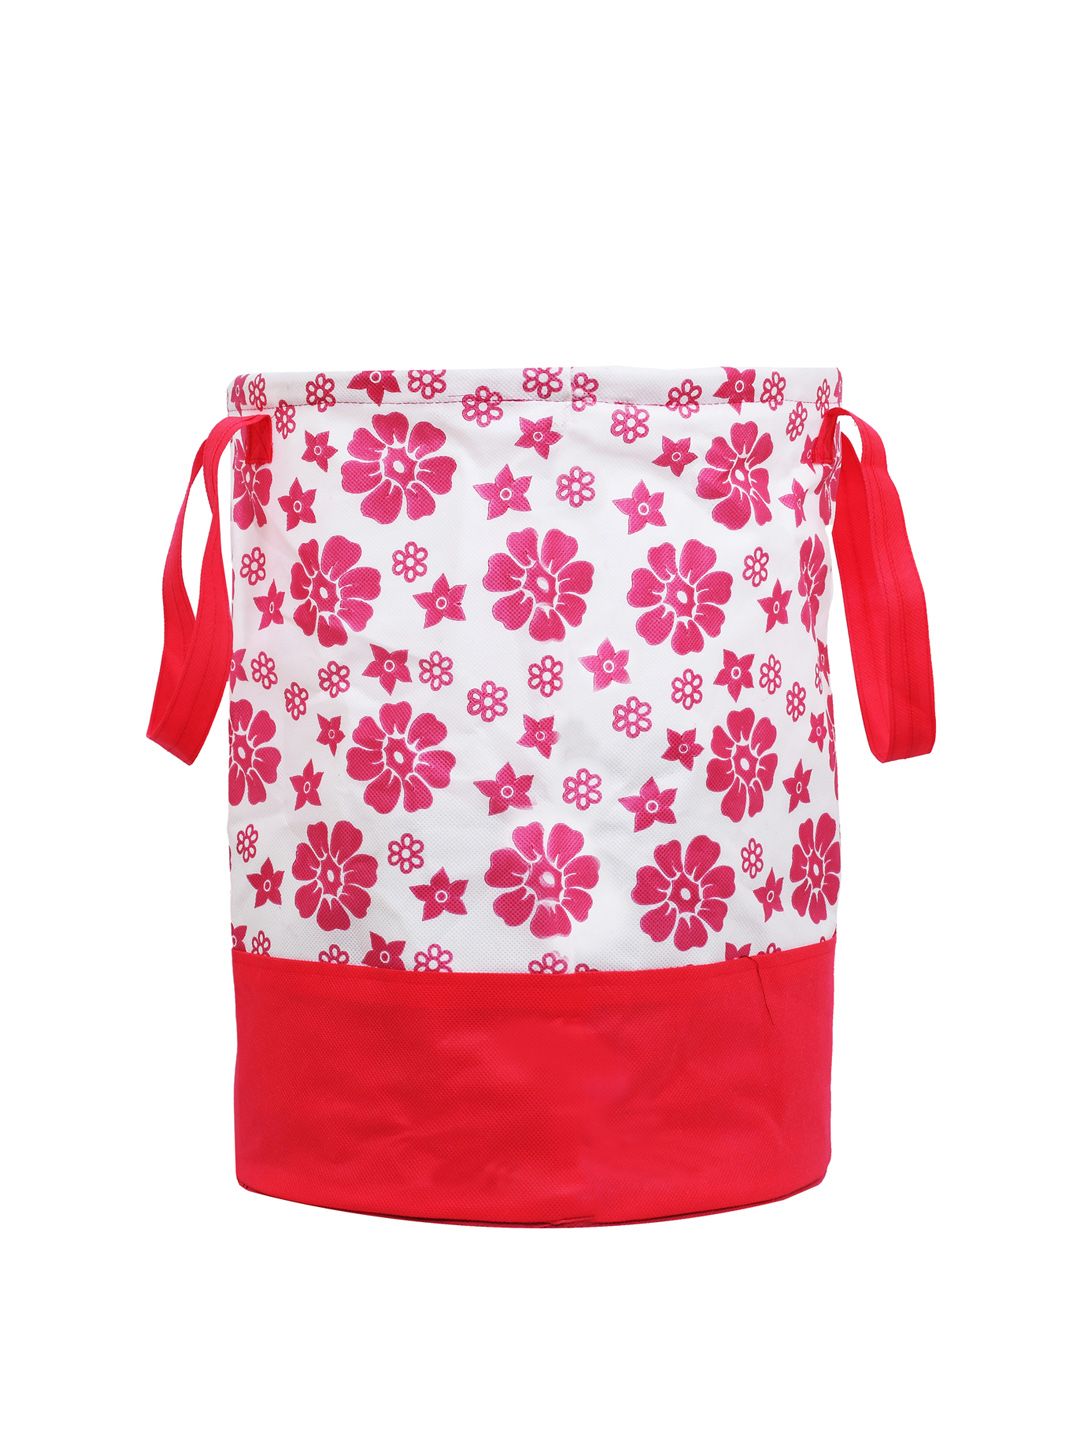 Kuber Industries Pink & White Floral Printed Waterproof Canvas Laundry Bag 45 L Price in India